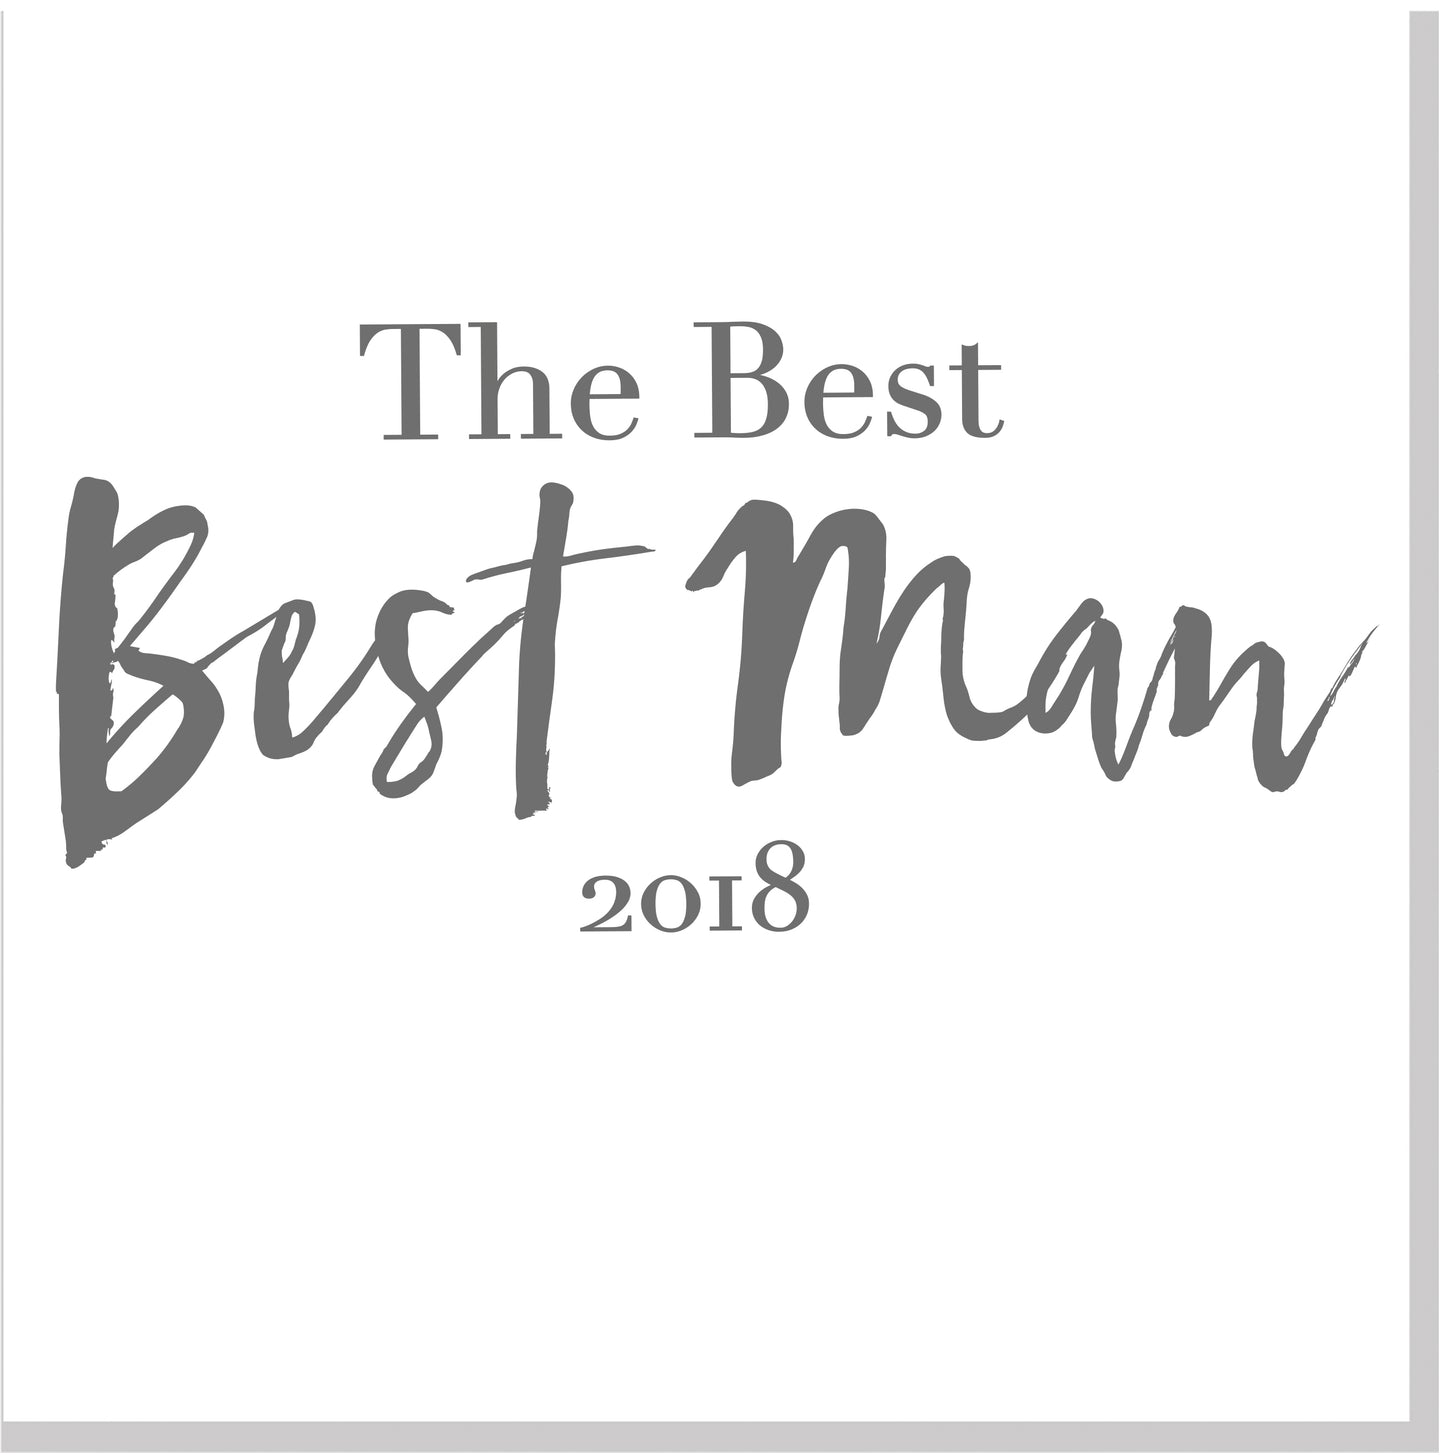 The Best Man 2018 Wedding square card